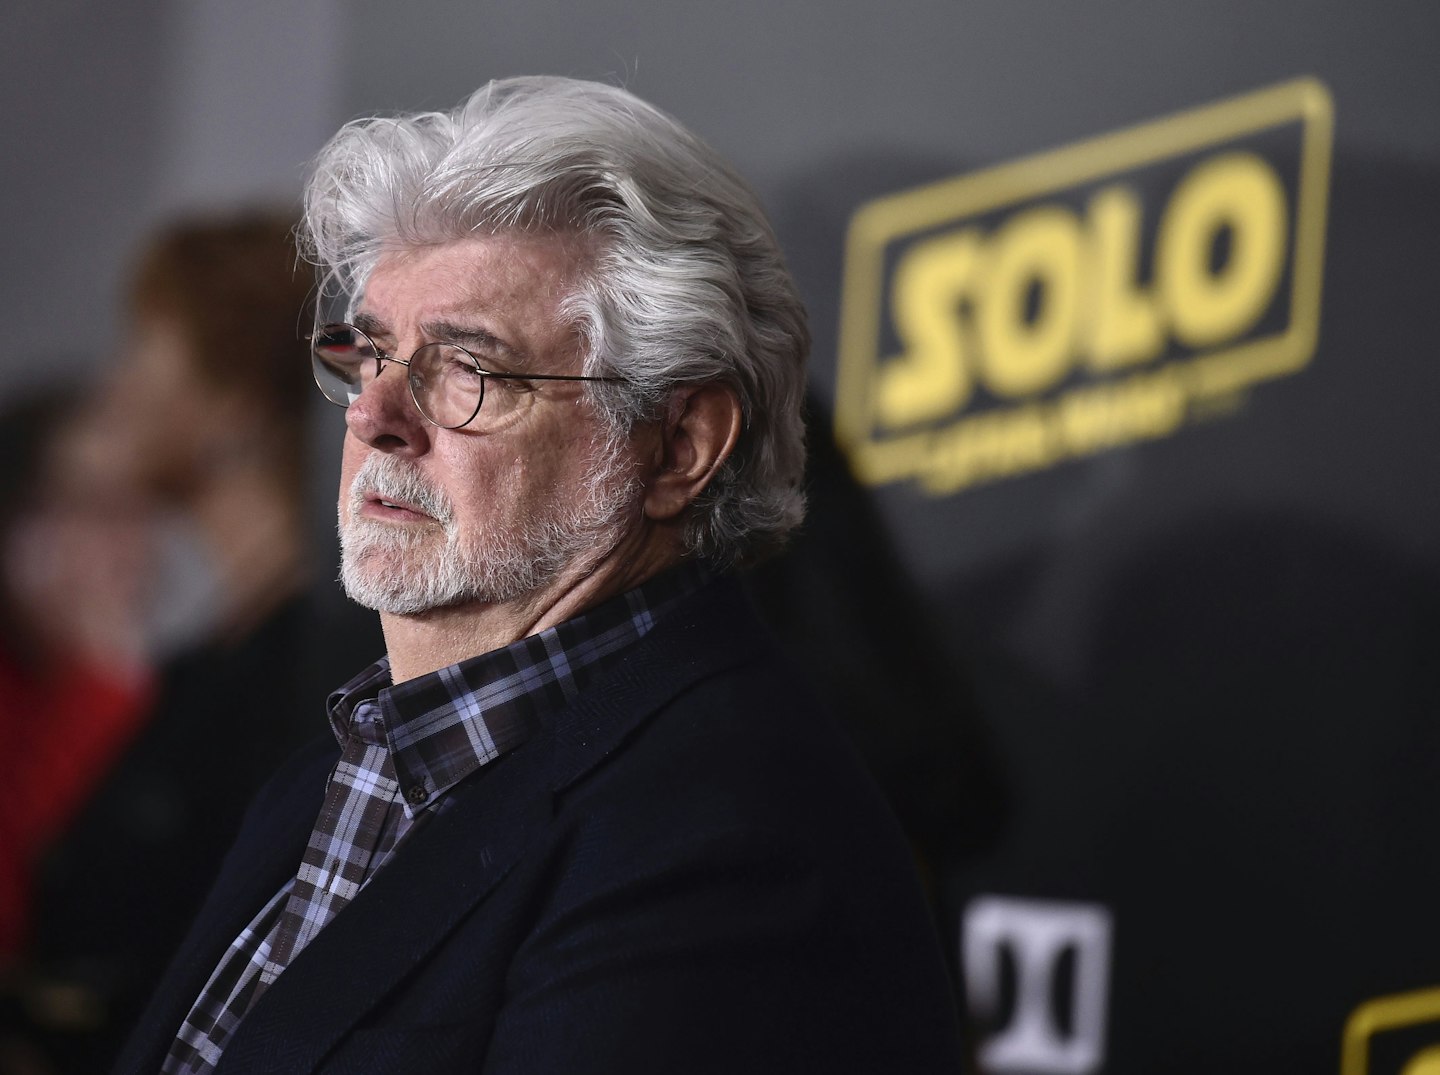 George Lucas Felt Betrayed By Disney For Not Using His Star Wars 7-9 Ideas